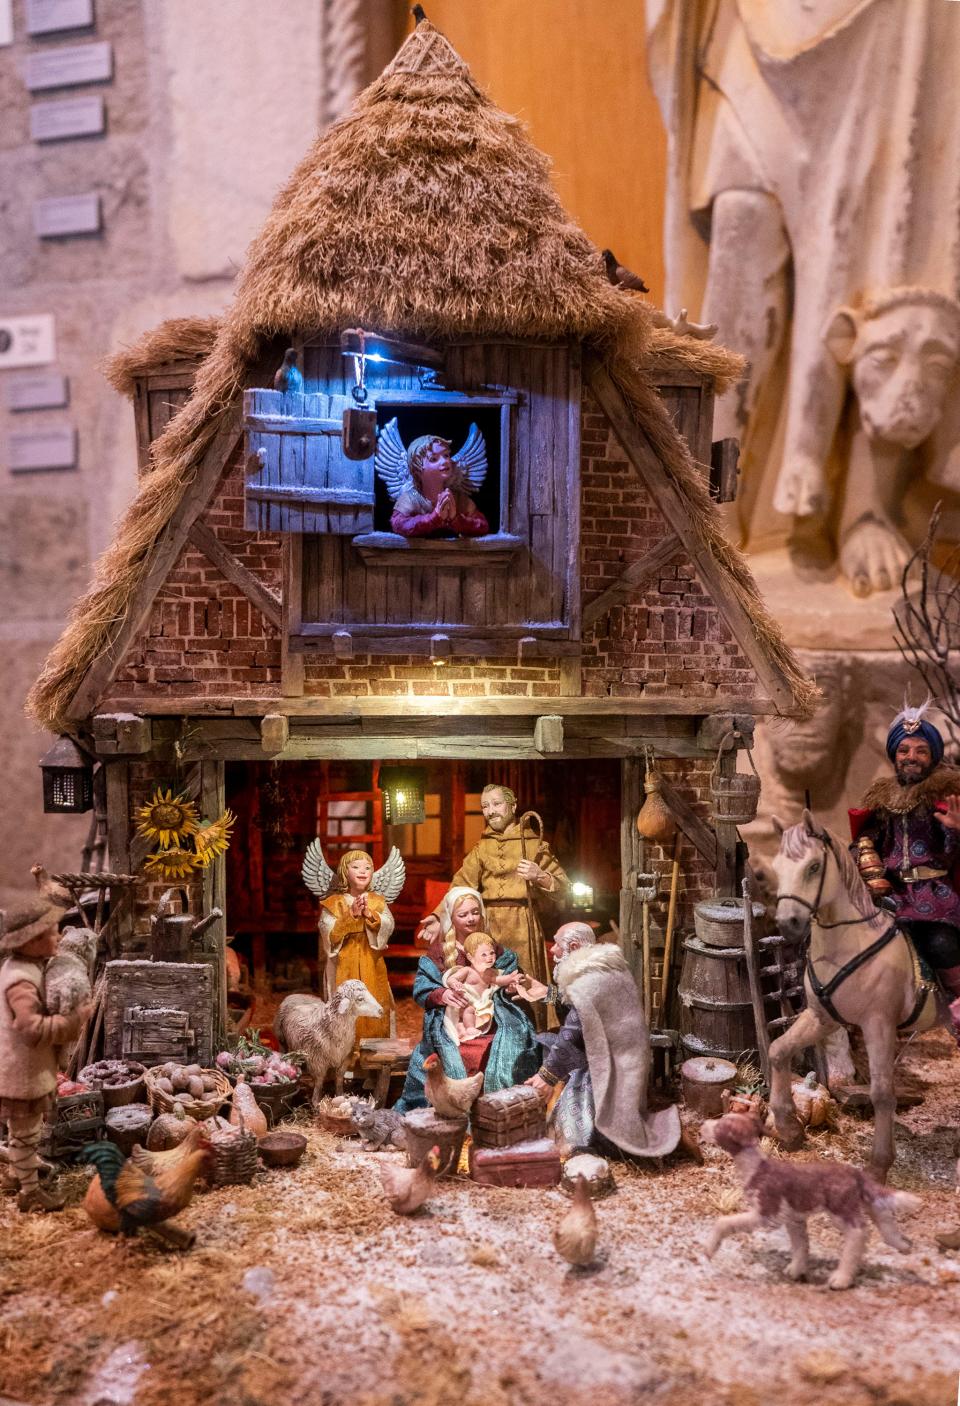 Part of the nativity scene by Karen Loccesano and Michael Palan on display at The World Nativities inside the Glencairn Museum in Bryn Athyn on Wednesday, Nov. 29, 2023.

[Daniella Heminghaus | Bucks County Courier Times]